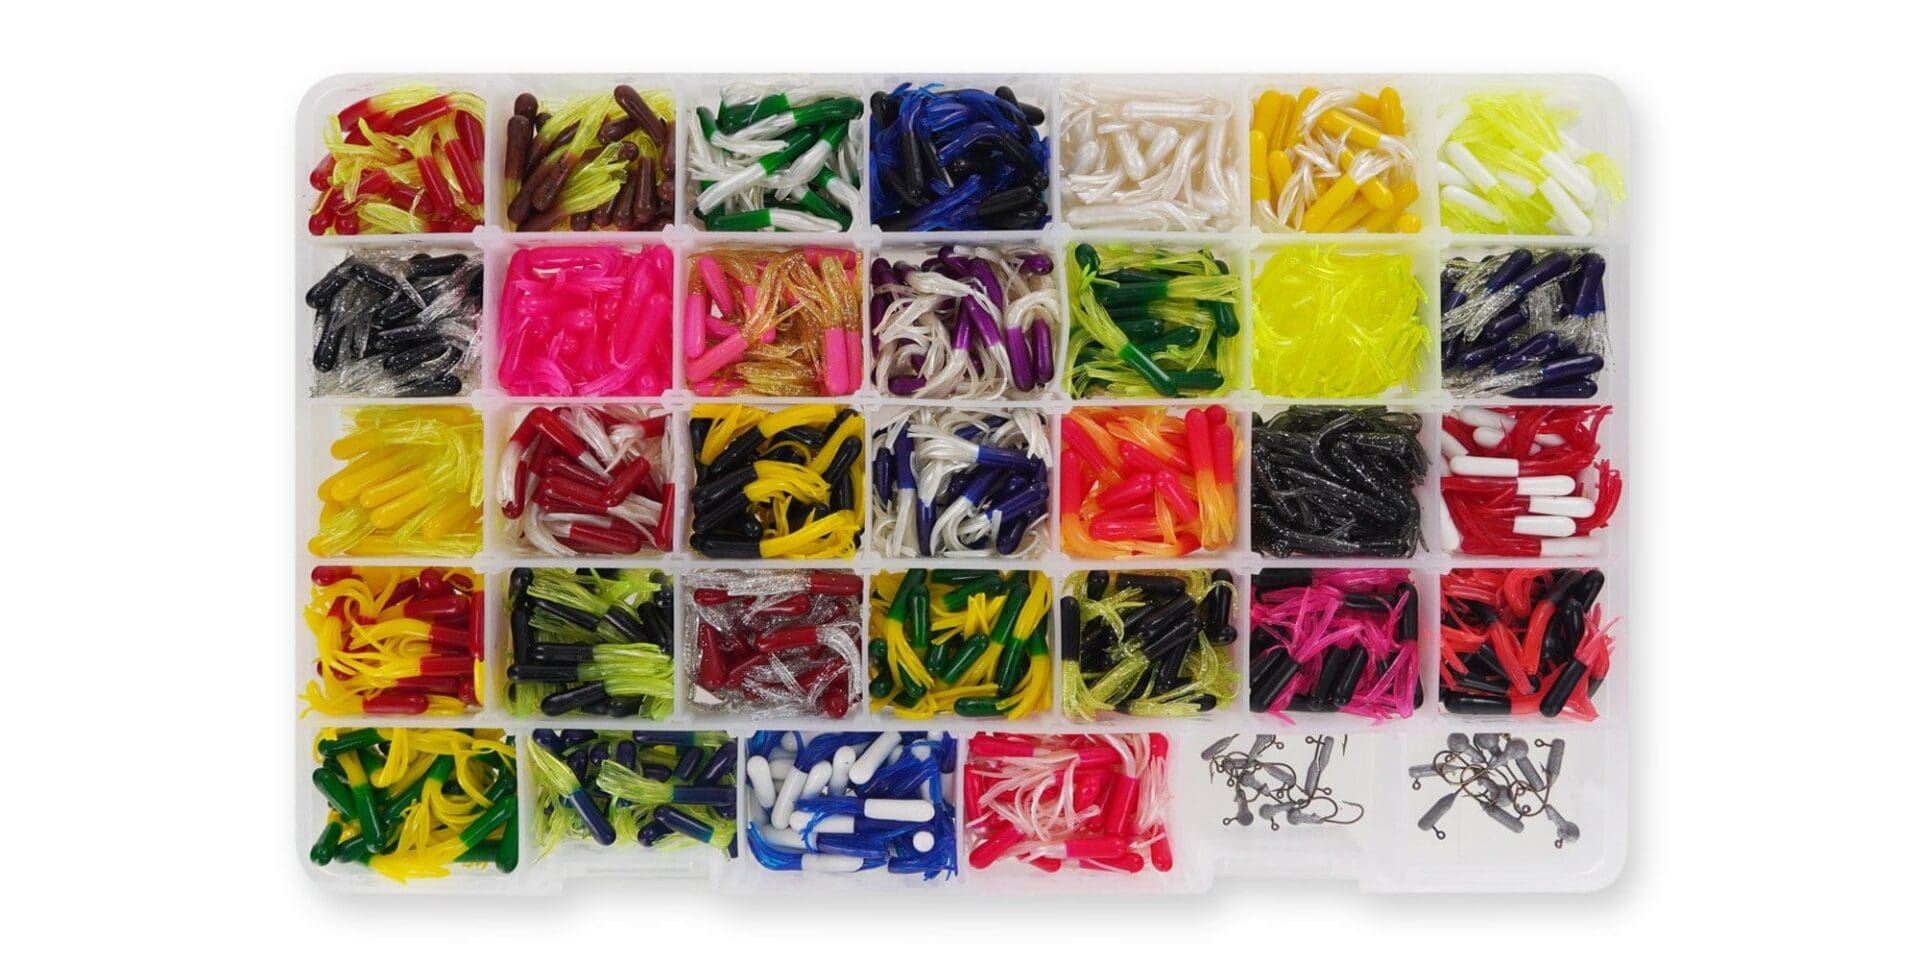 50Pcs Crappie Jigs Lure Set 2 inch Crappie Bait Crappie Jig Heads Hooks Fishing  Lures for Crappie (A:10pcs 1/16 oz jigs and 40pcs Lures) : :  Sports, Fitness & Outdoors